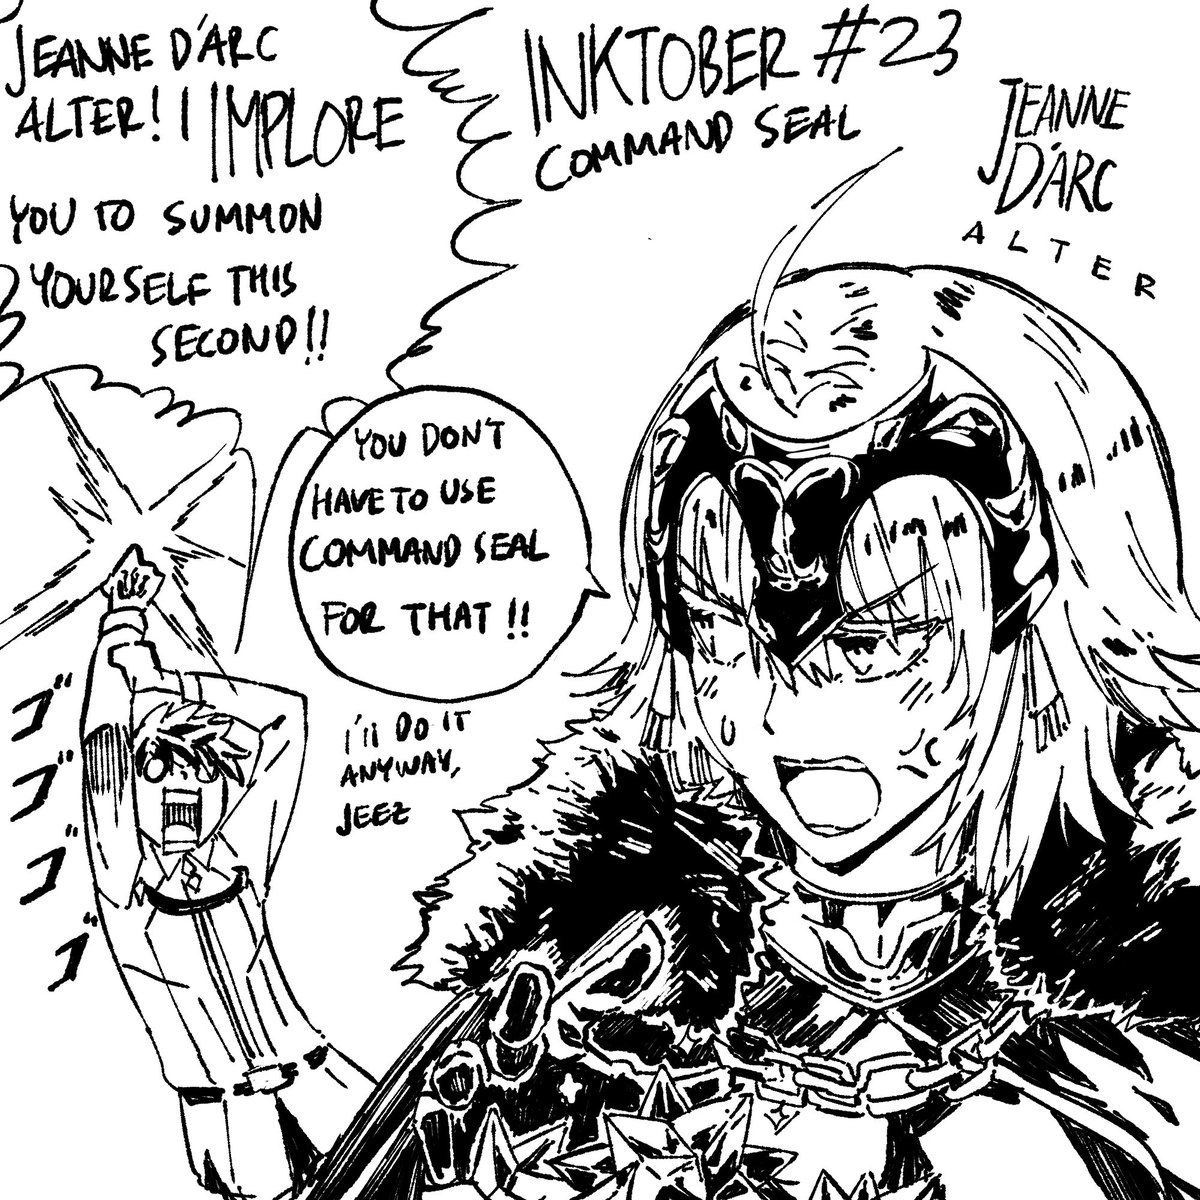 day 23, it's command seal?! this is also my birthday and I'll roll for jalter, so I hope this kind of 'offering' will work! 

I will post the gatcha result on the reply section :D

#FGO #inktober #fgoecartist 